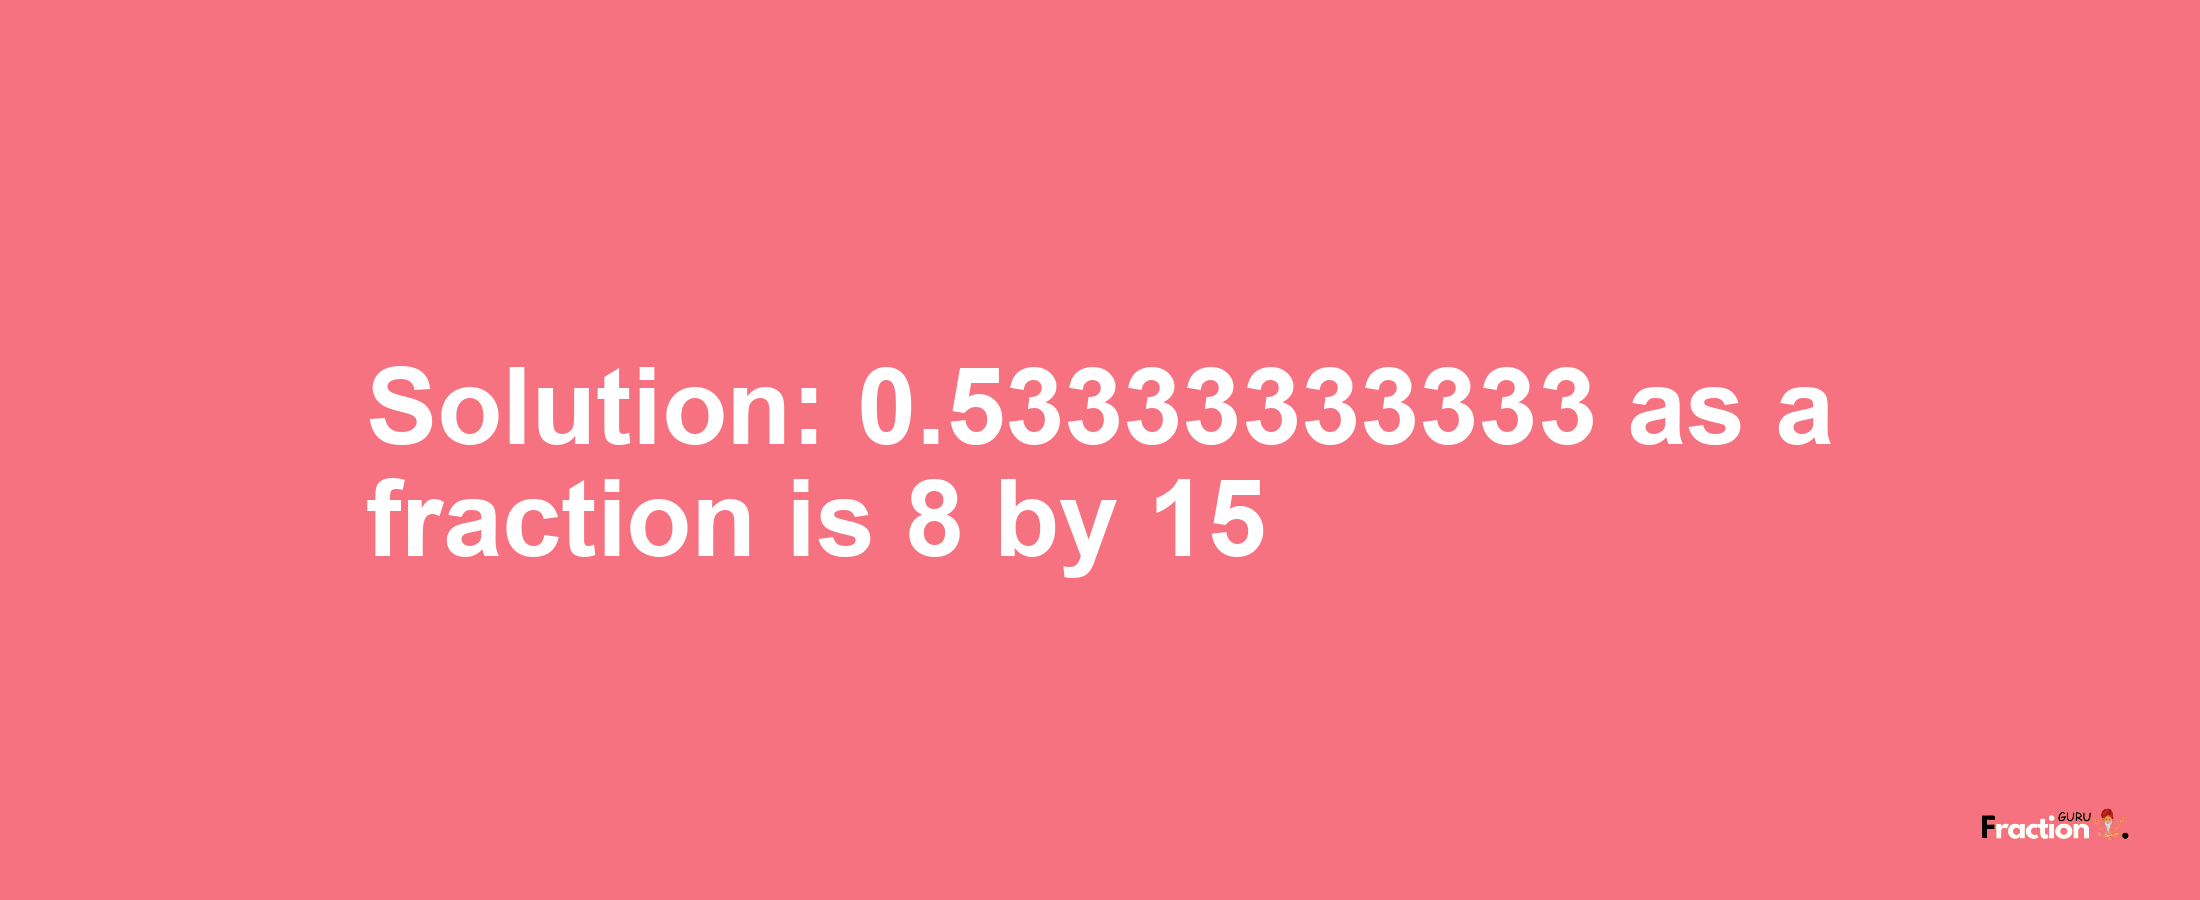 Solution:0.53333333333 as a fraction is 8/15